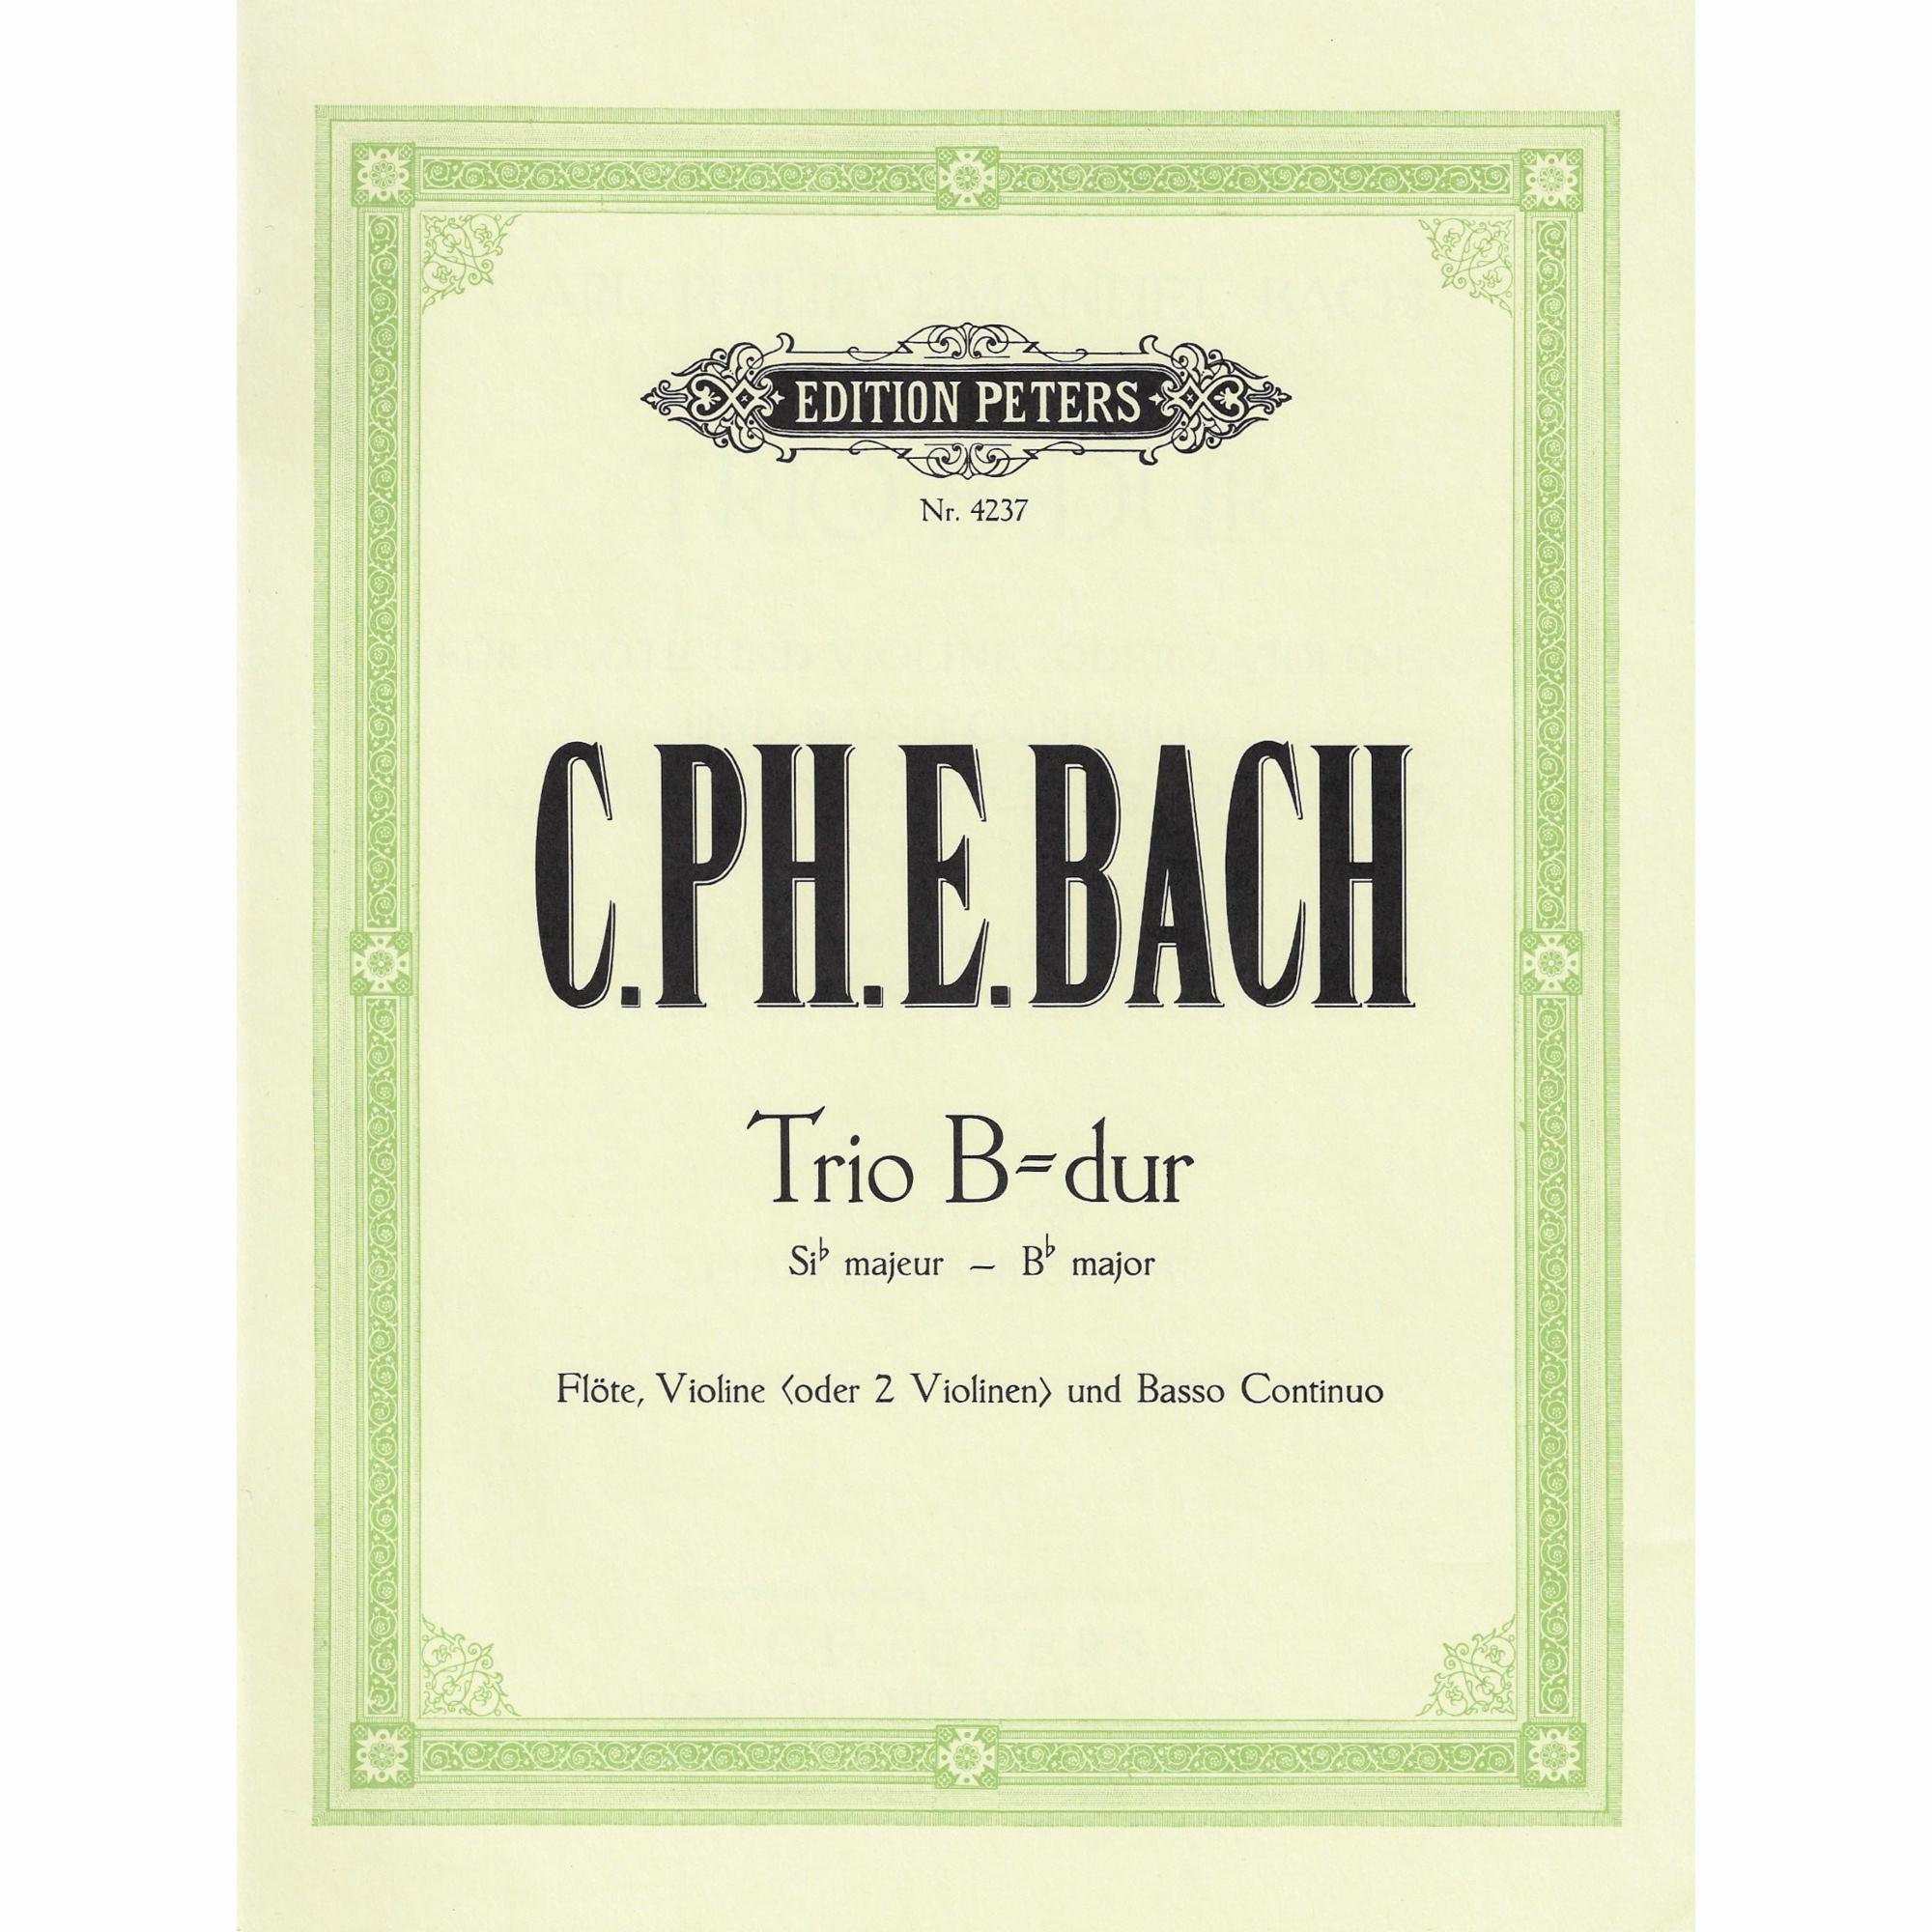 C.P.E. Bach -- Trio in B-Flat Major for Two Violins and Basso Continuo